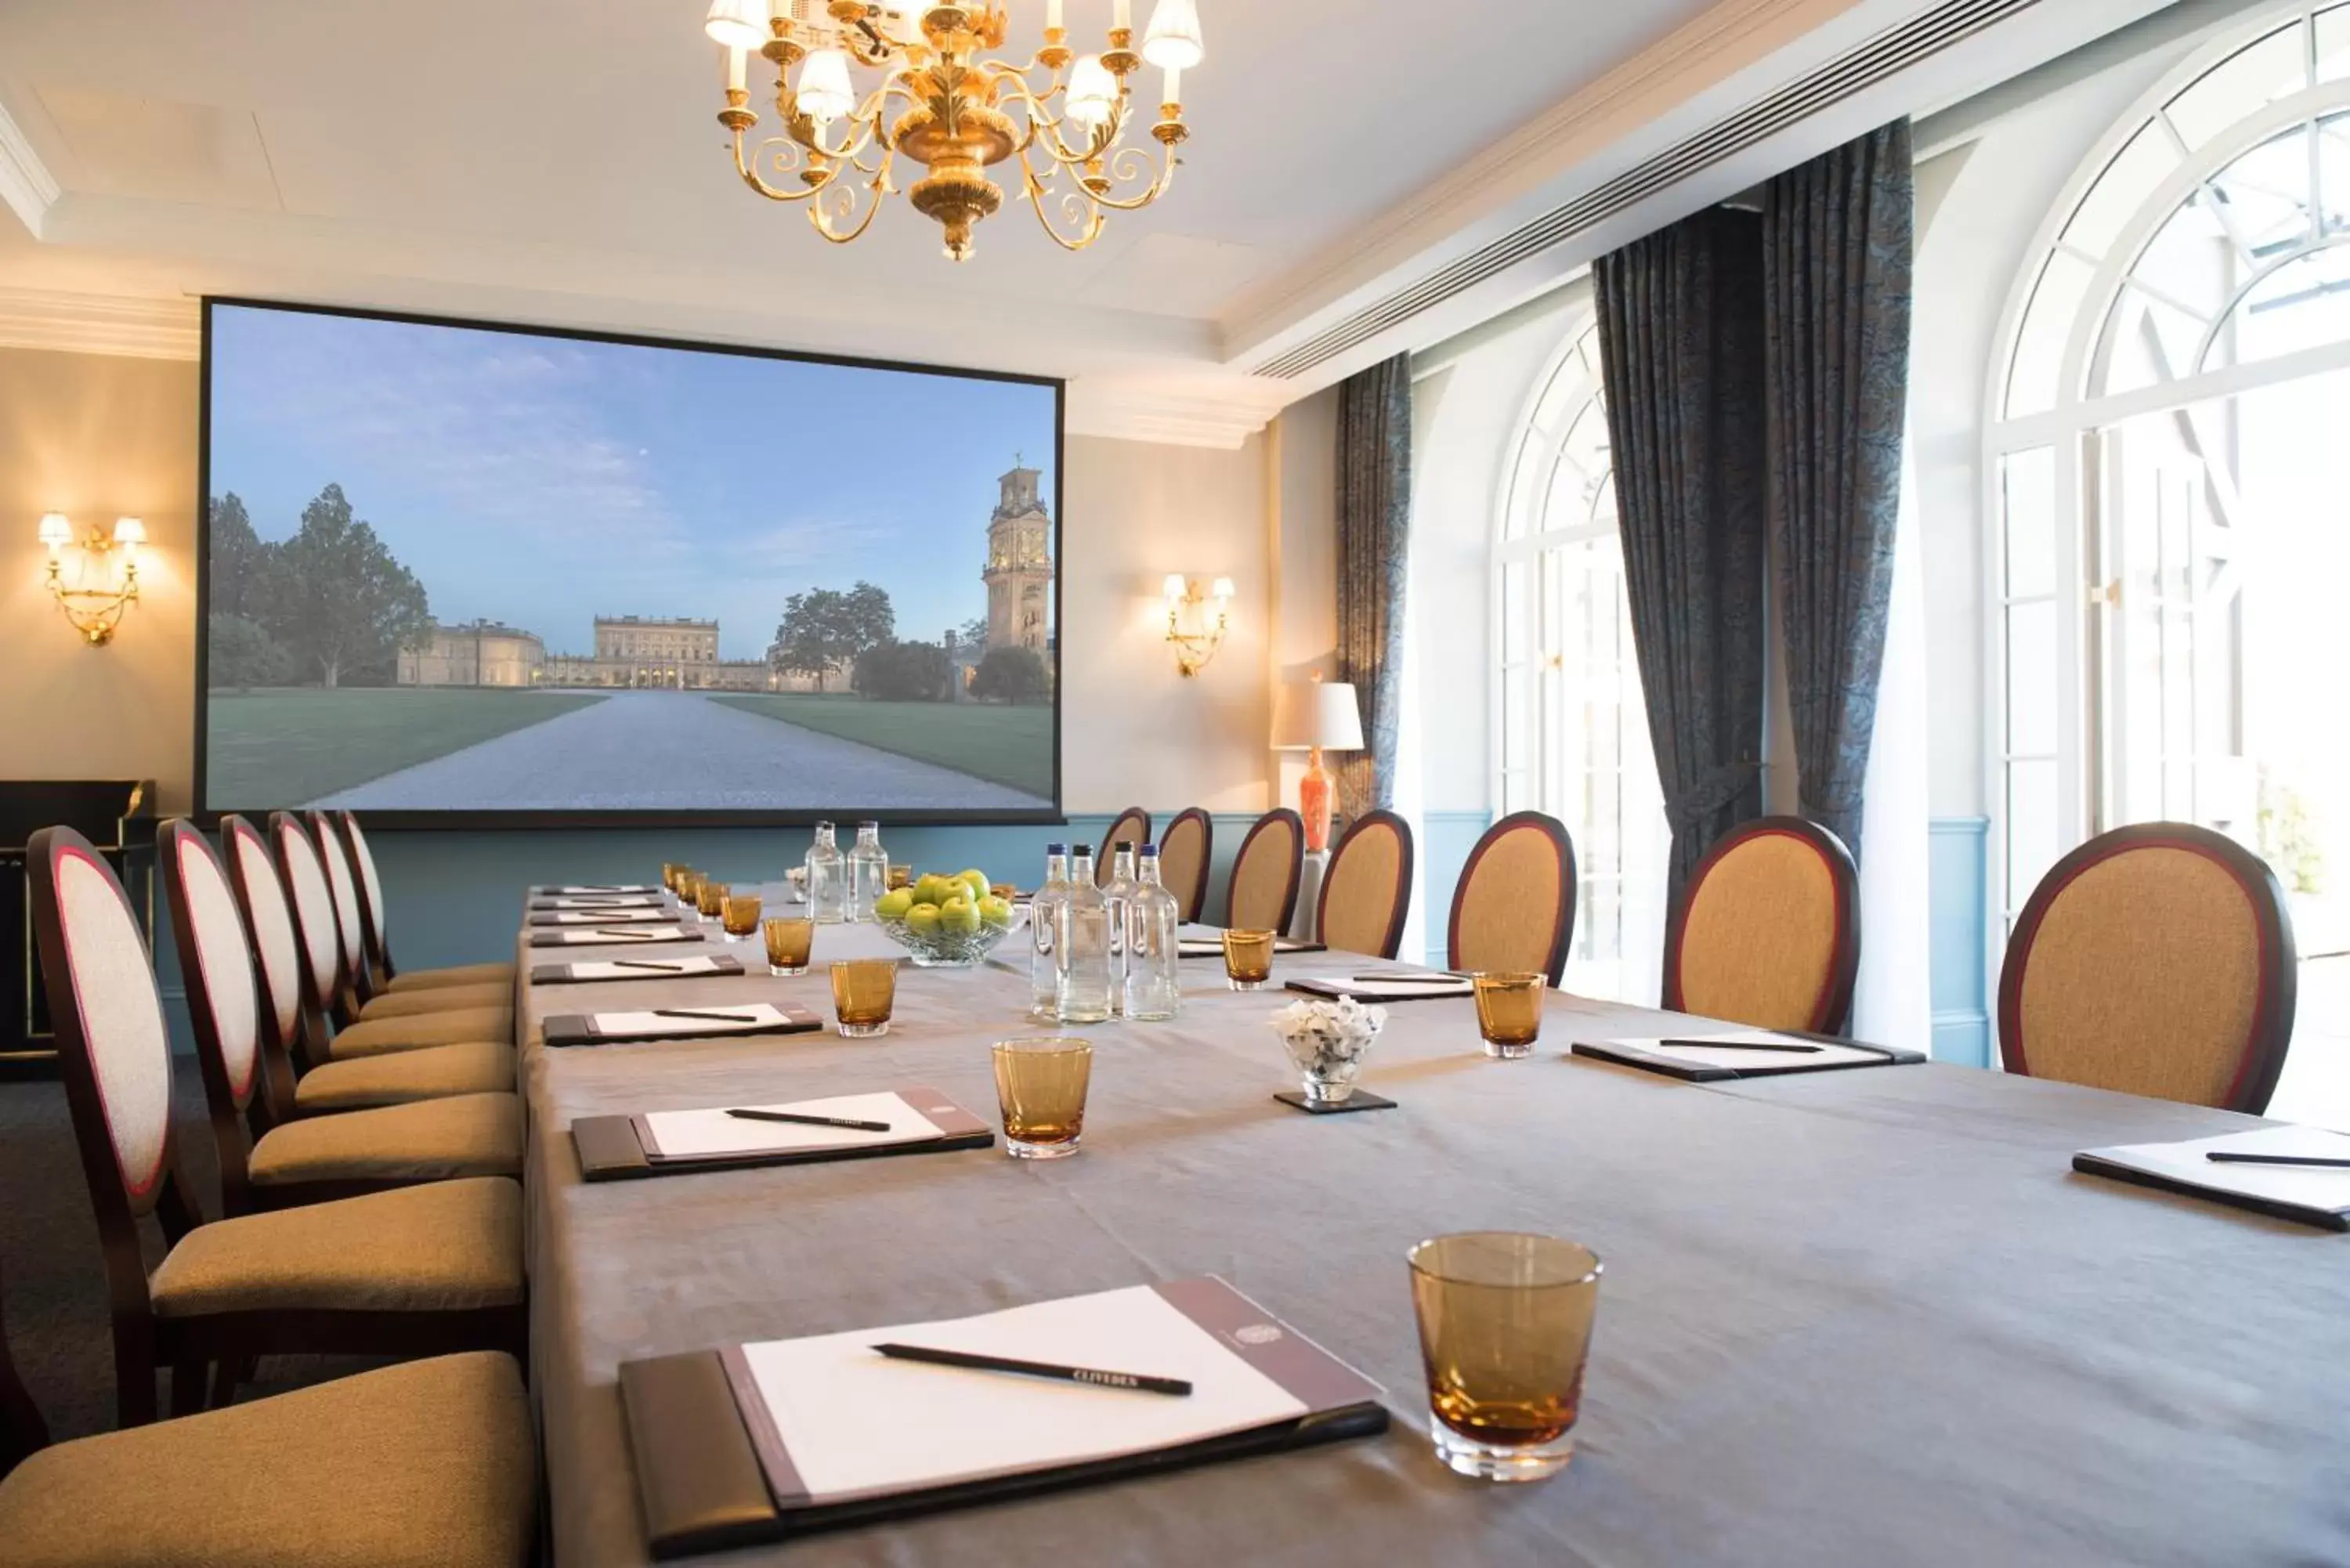 Meeting/conference room in Cliveden House - an Iconic Luxury Hotel